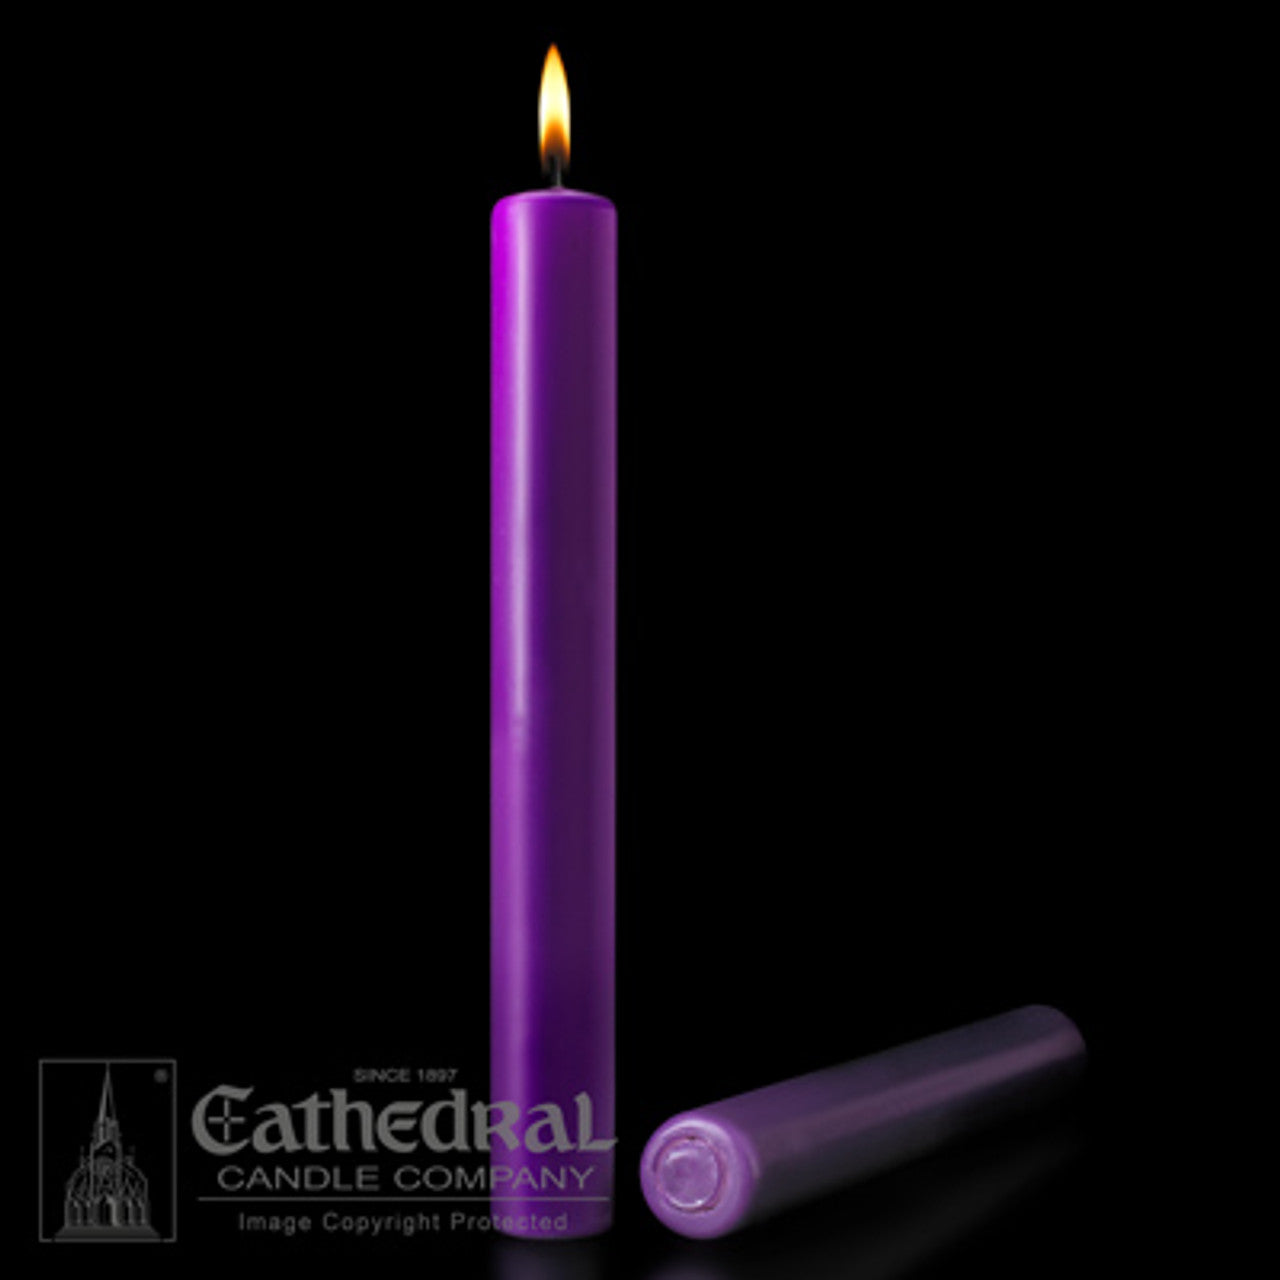 51% Beeswax Unbleached Purple Altar Candles | All Sizes - Cathedral Candle - Chiarelli's Religious Goods & Church Supply